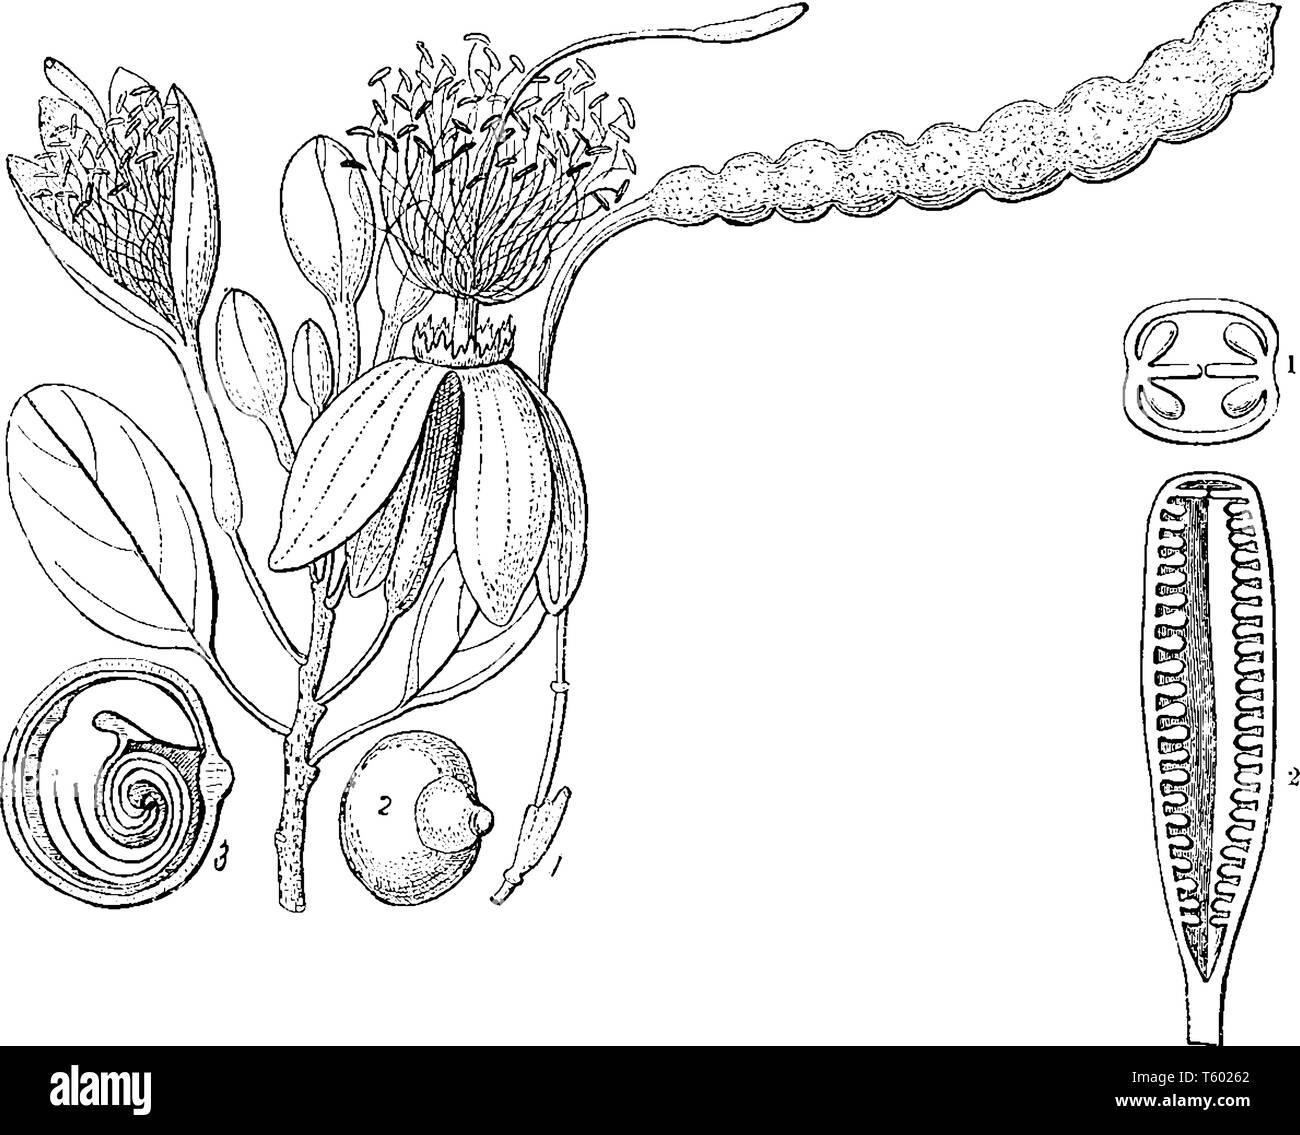 Maerua is a genus of plants in the family Capparaceae, with its center of diversity in Africa, vintage line drawing or engraving illustration. Stock Vector